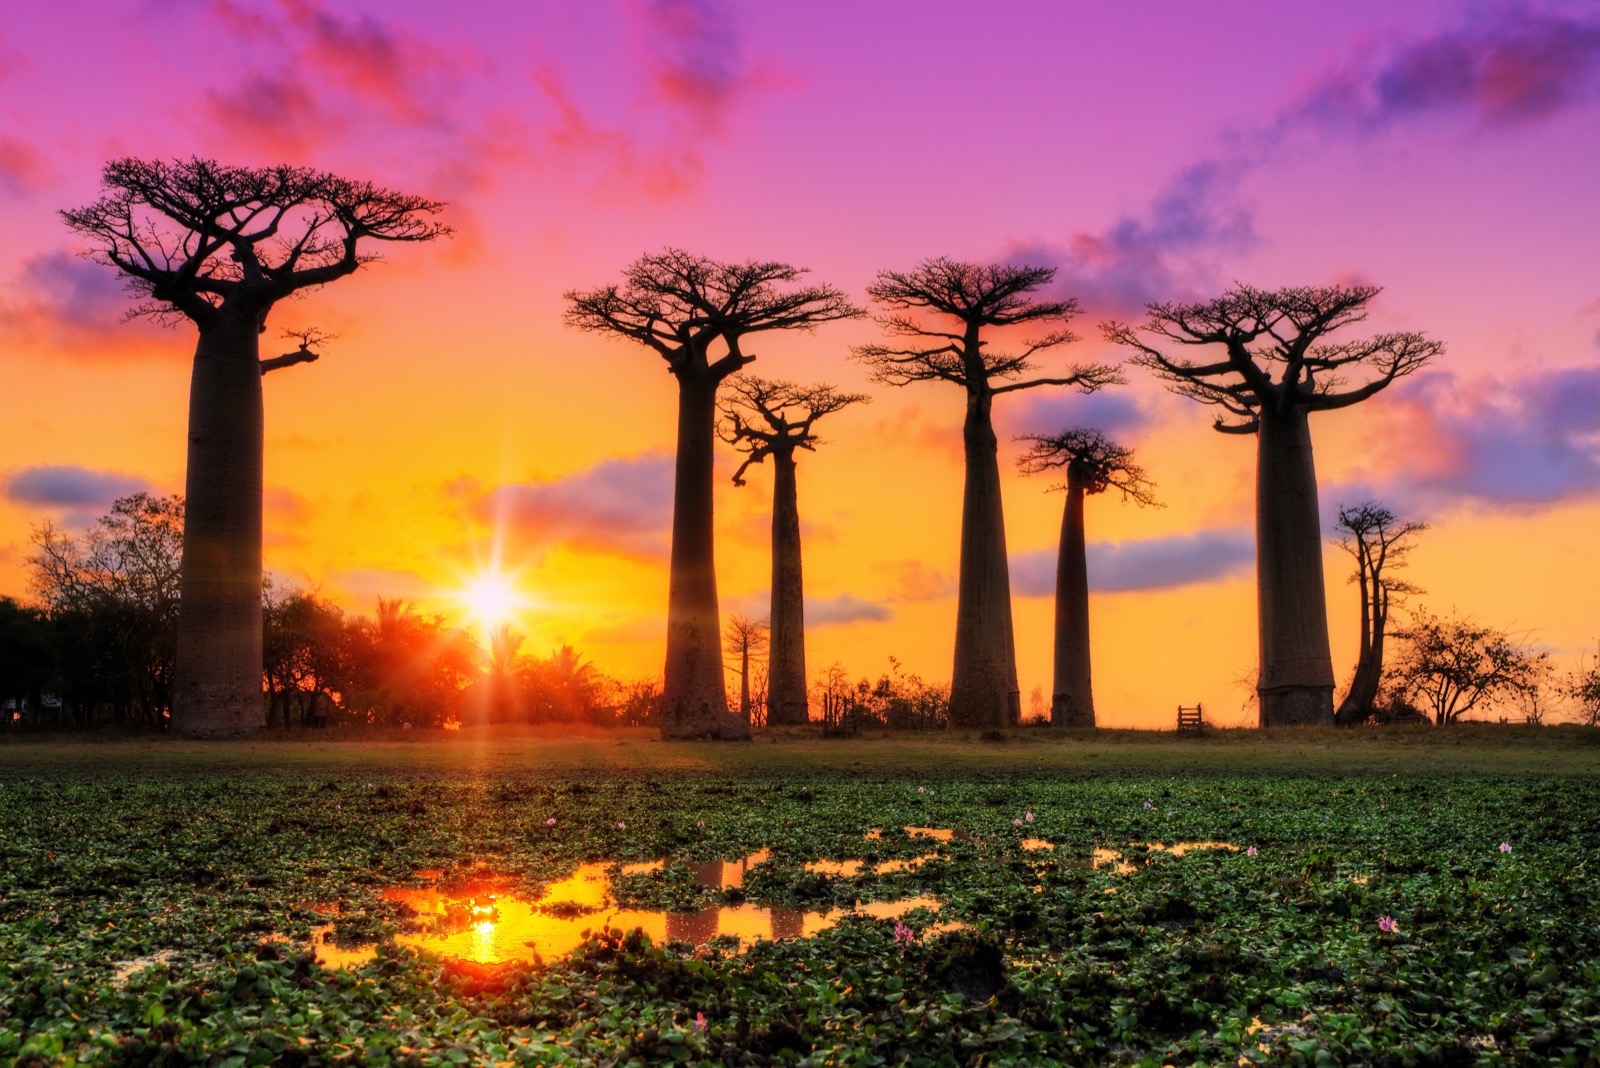 We’ll Give You an 🌮 International Food to Try Based on the ✈️ Places You Would Rather Visit Avenue of the Baobabs, Madagascar